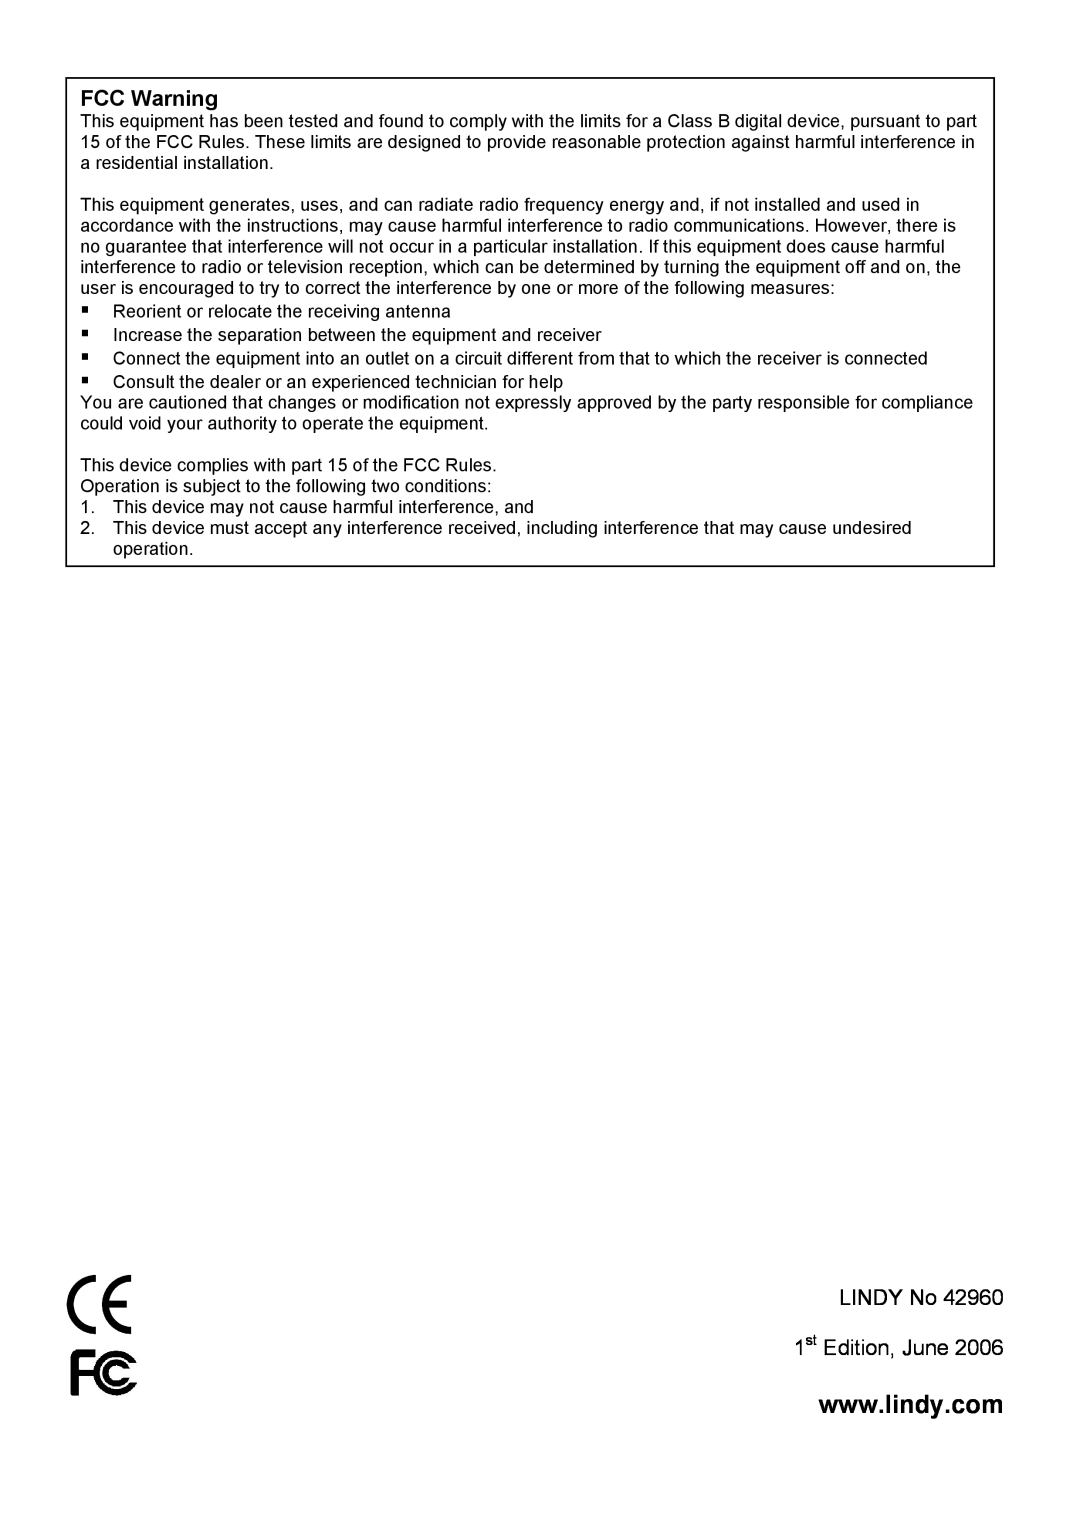 Lindy 42960 user manual FCC Warning, LINDY No 1st Edition, June 